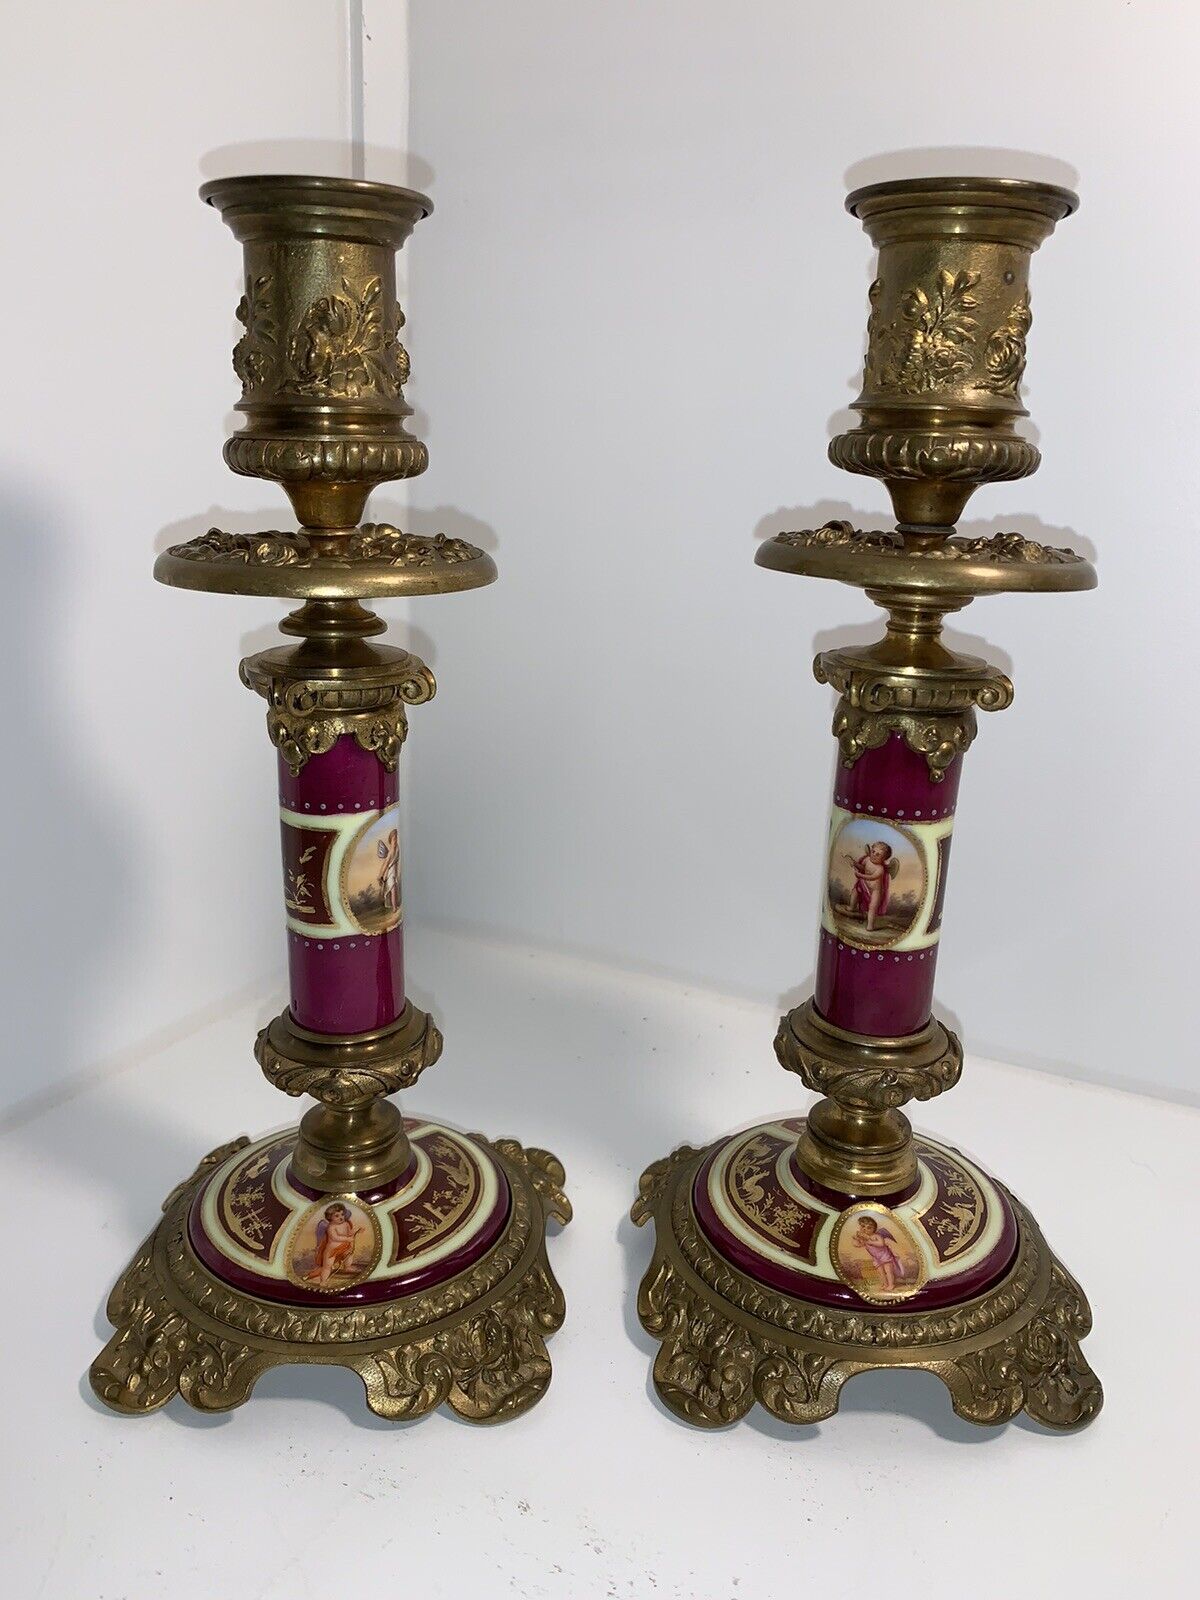 Antique French Sevres Porcelain And Bronze Candle Holder Cherubs